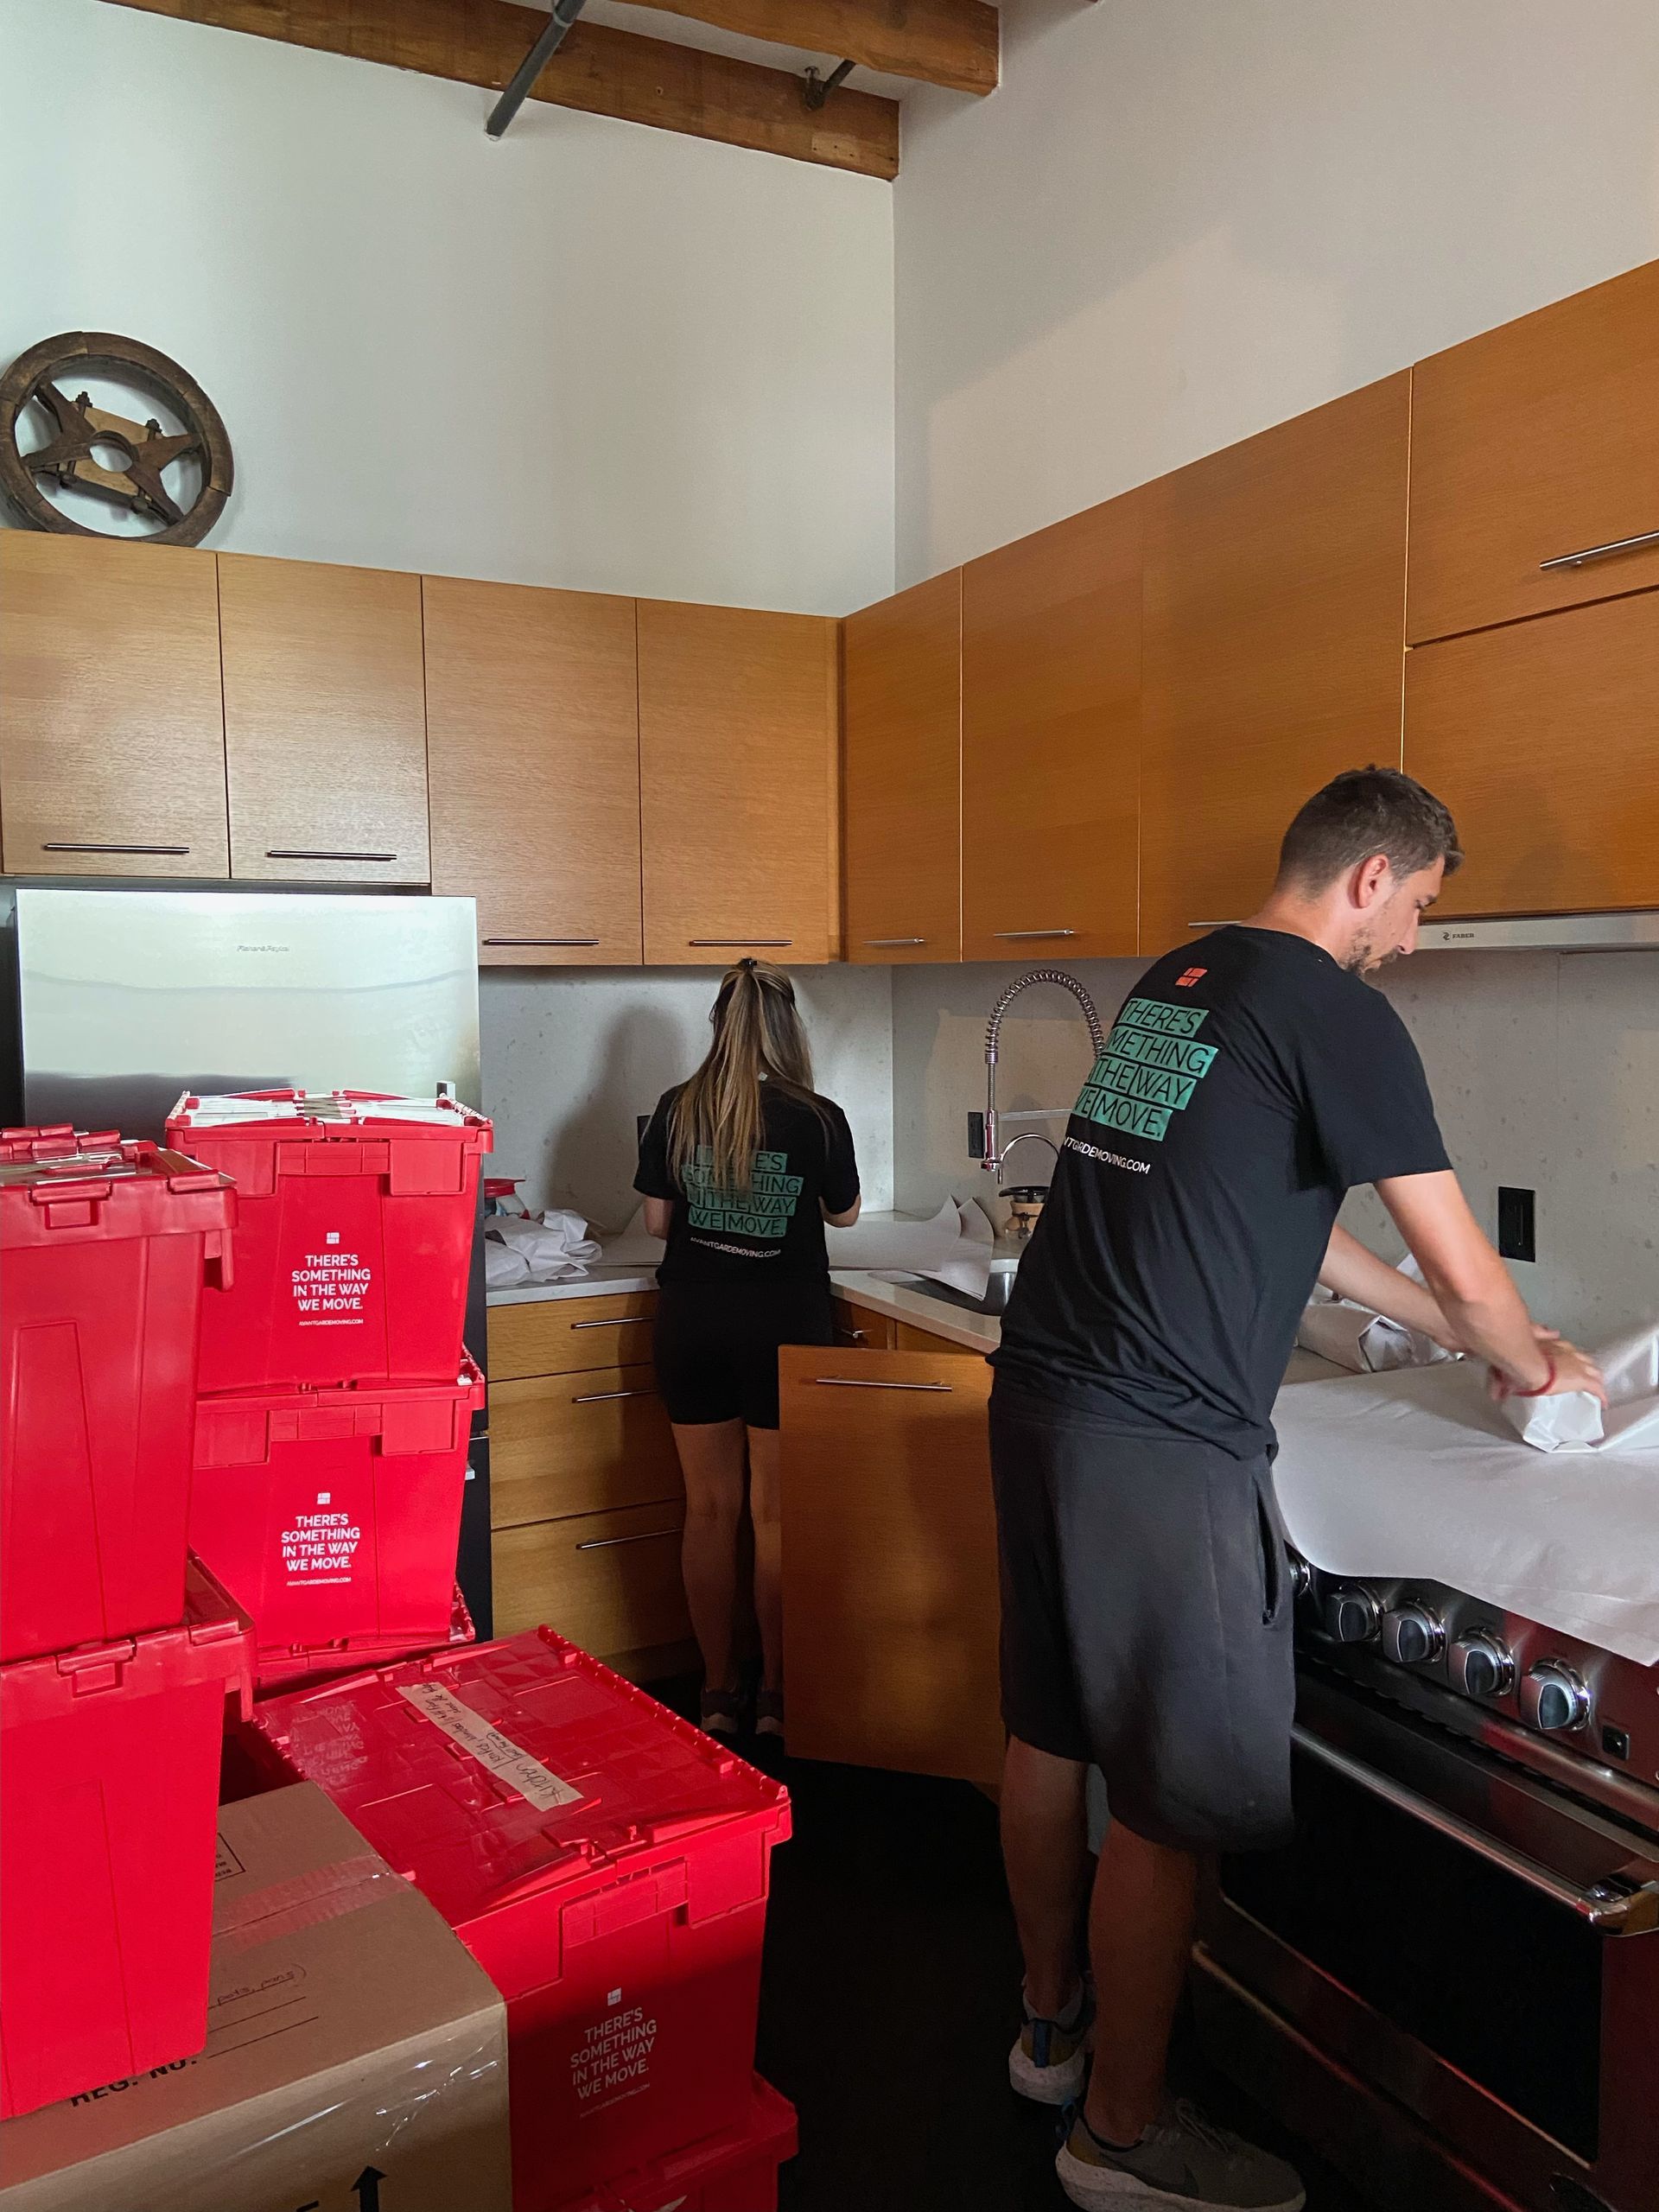 movers and packers packing up kitchen 